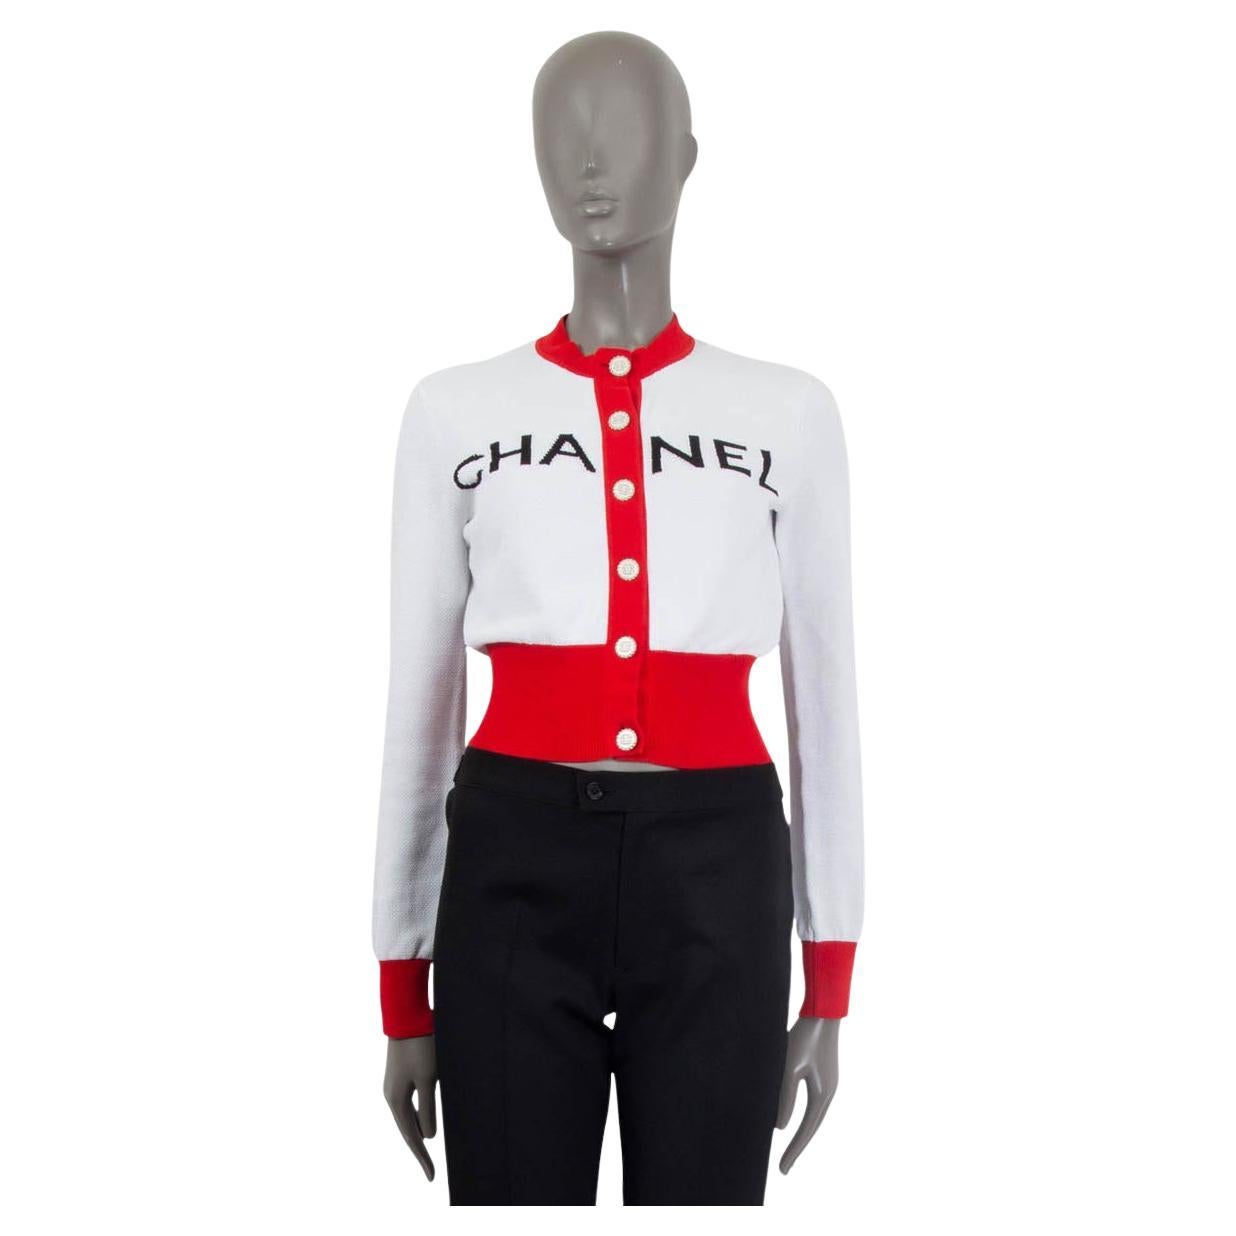 CHANEL red white cotton 2019 ICONIC LOGO CROPPED Cardigan Sweater 36 XS For Sale